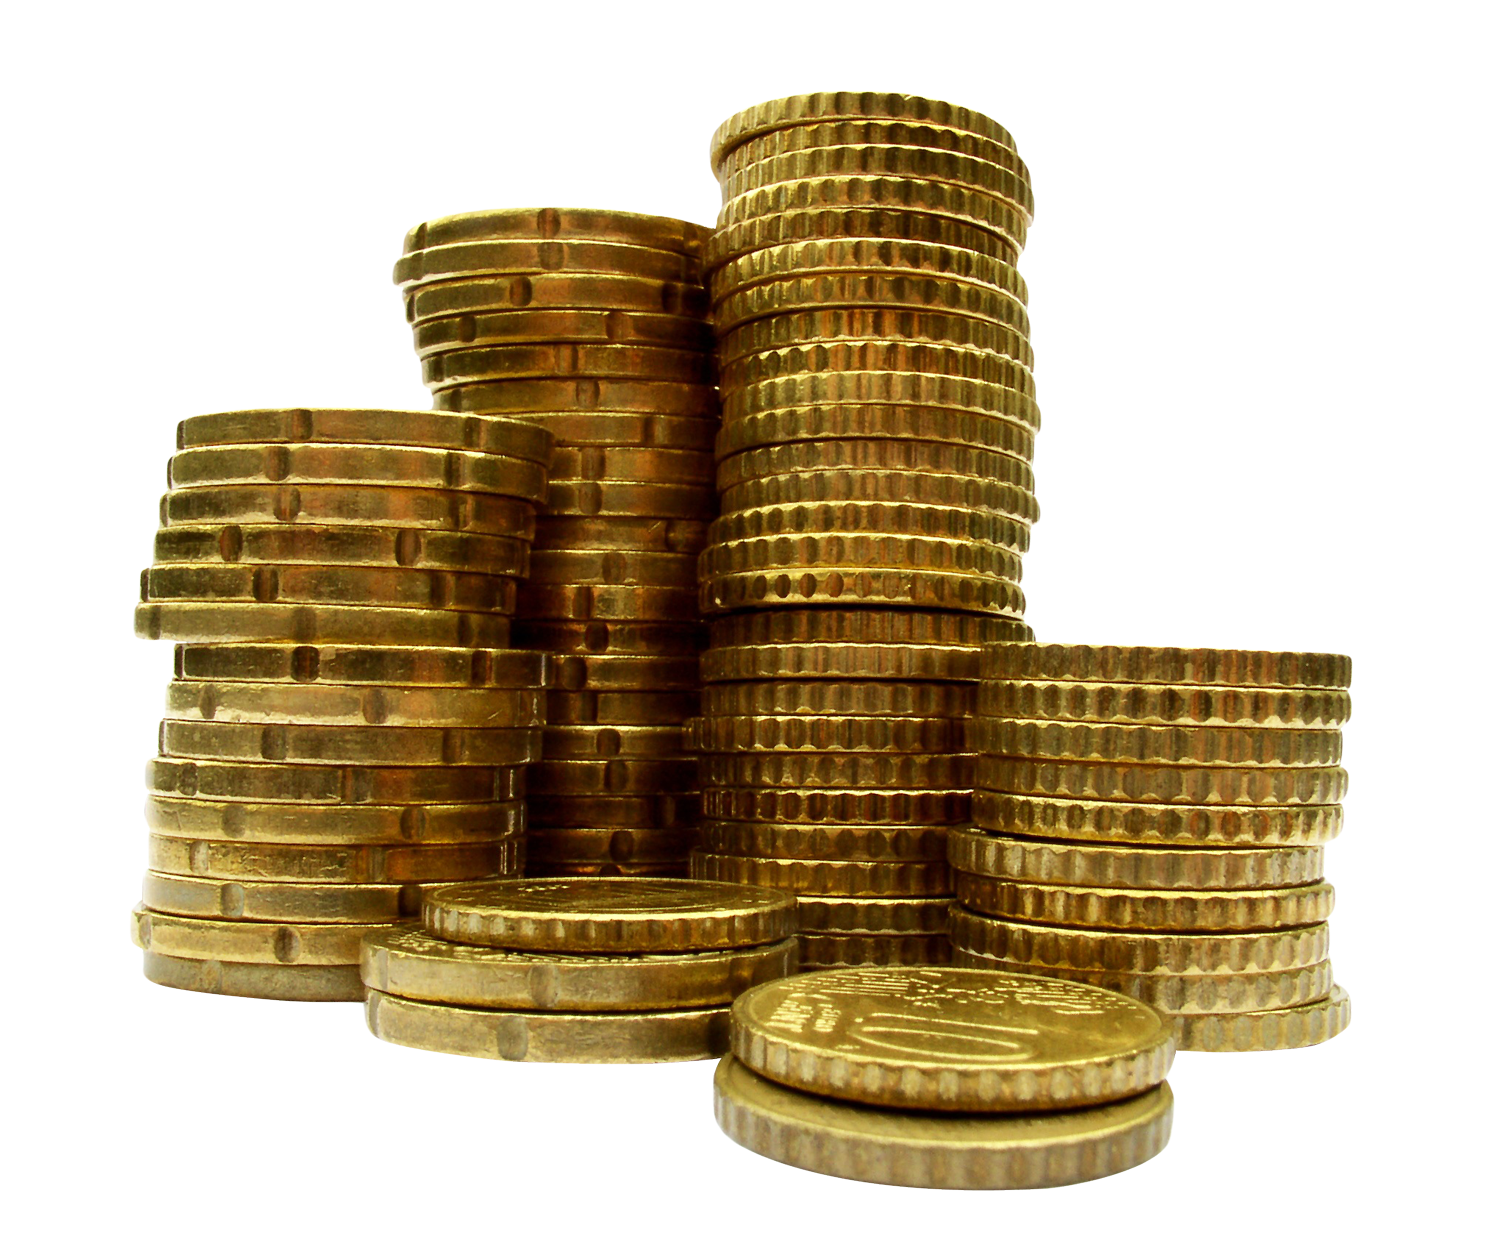 coins clipart money canadian